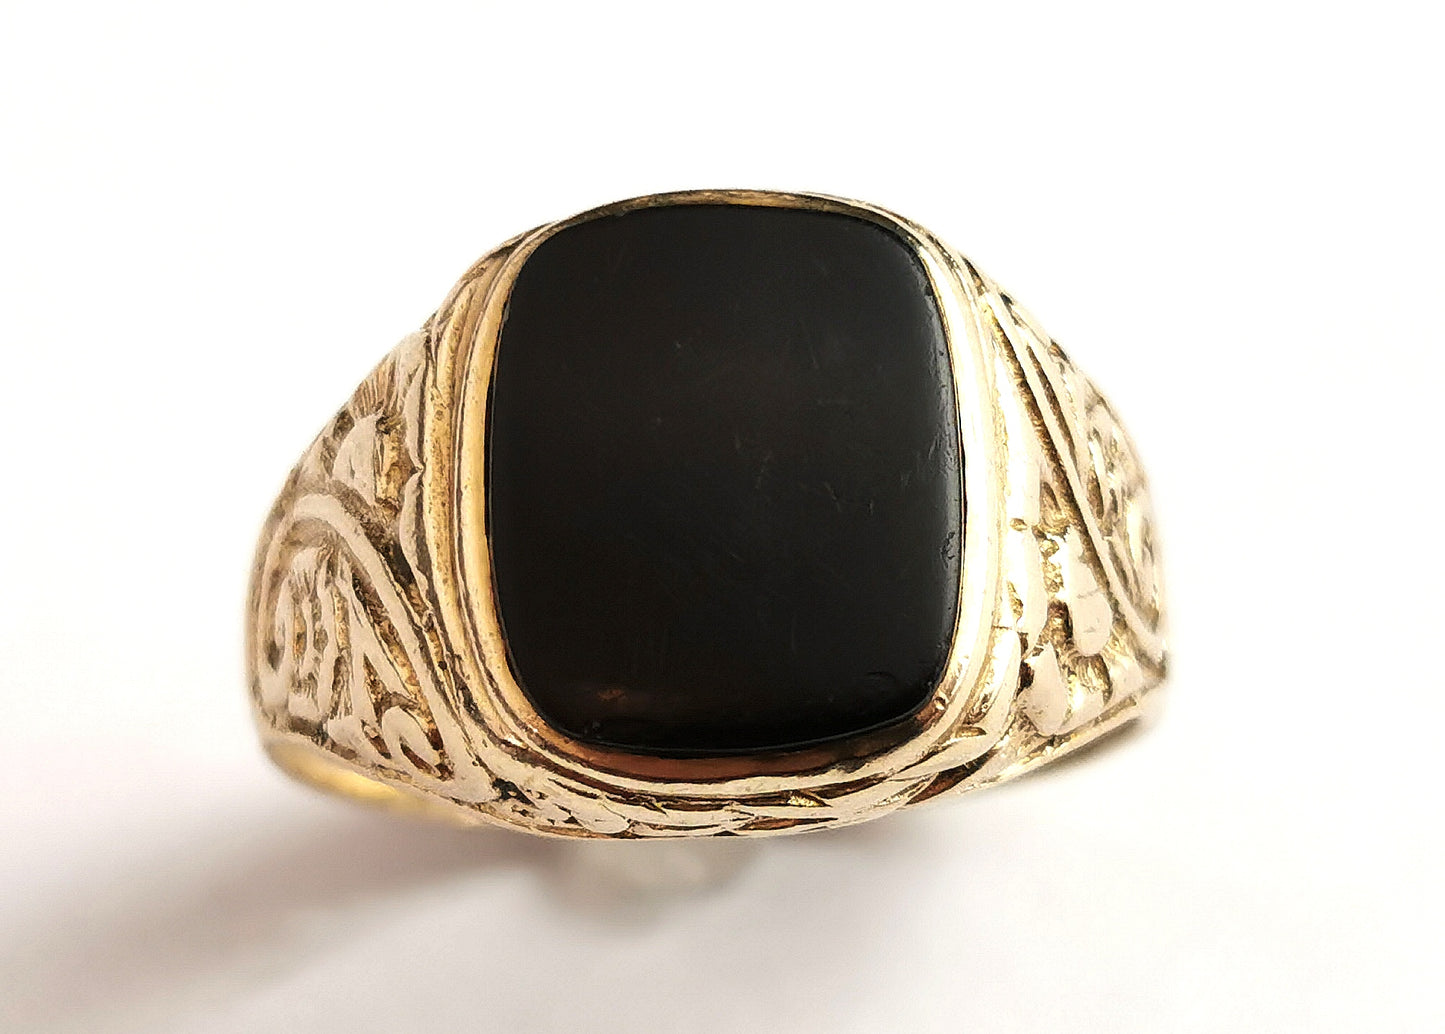 Vintage Onyx signet ring, 9ct yellow gold, Floral